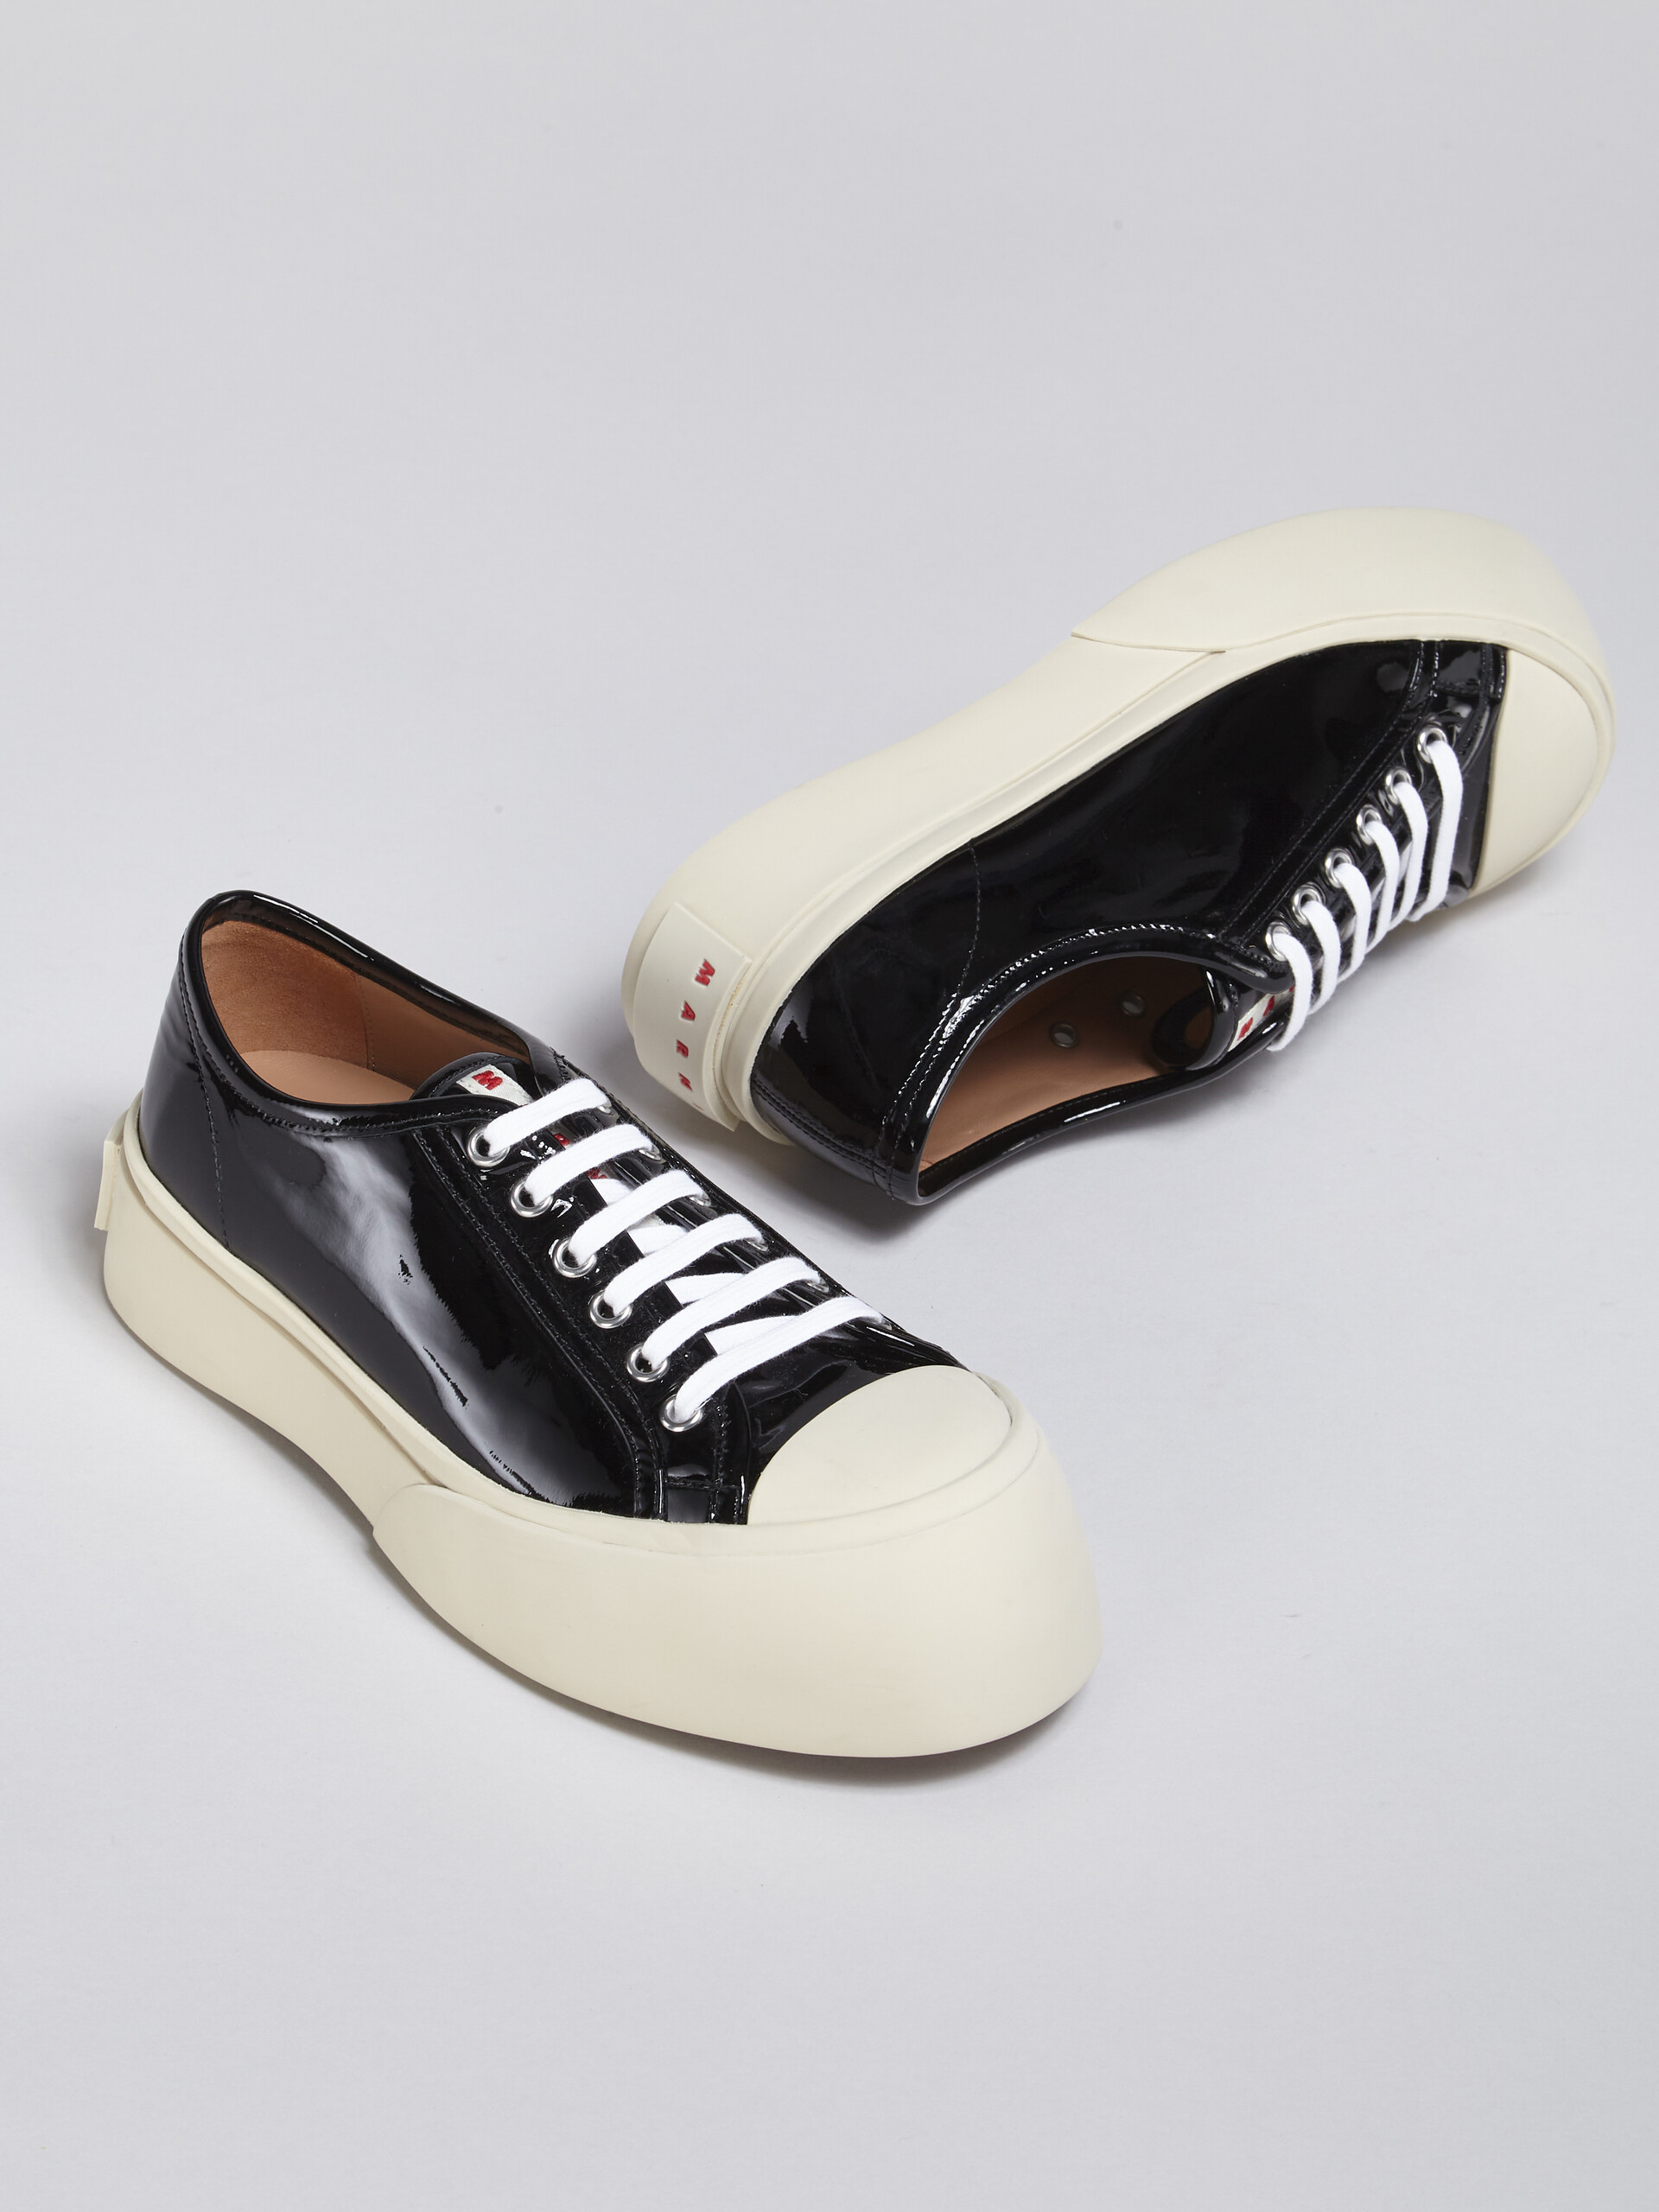 Black patent leather PABLO lace-up sneaker